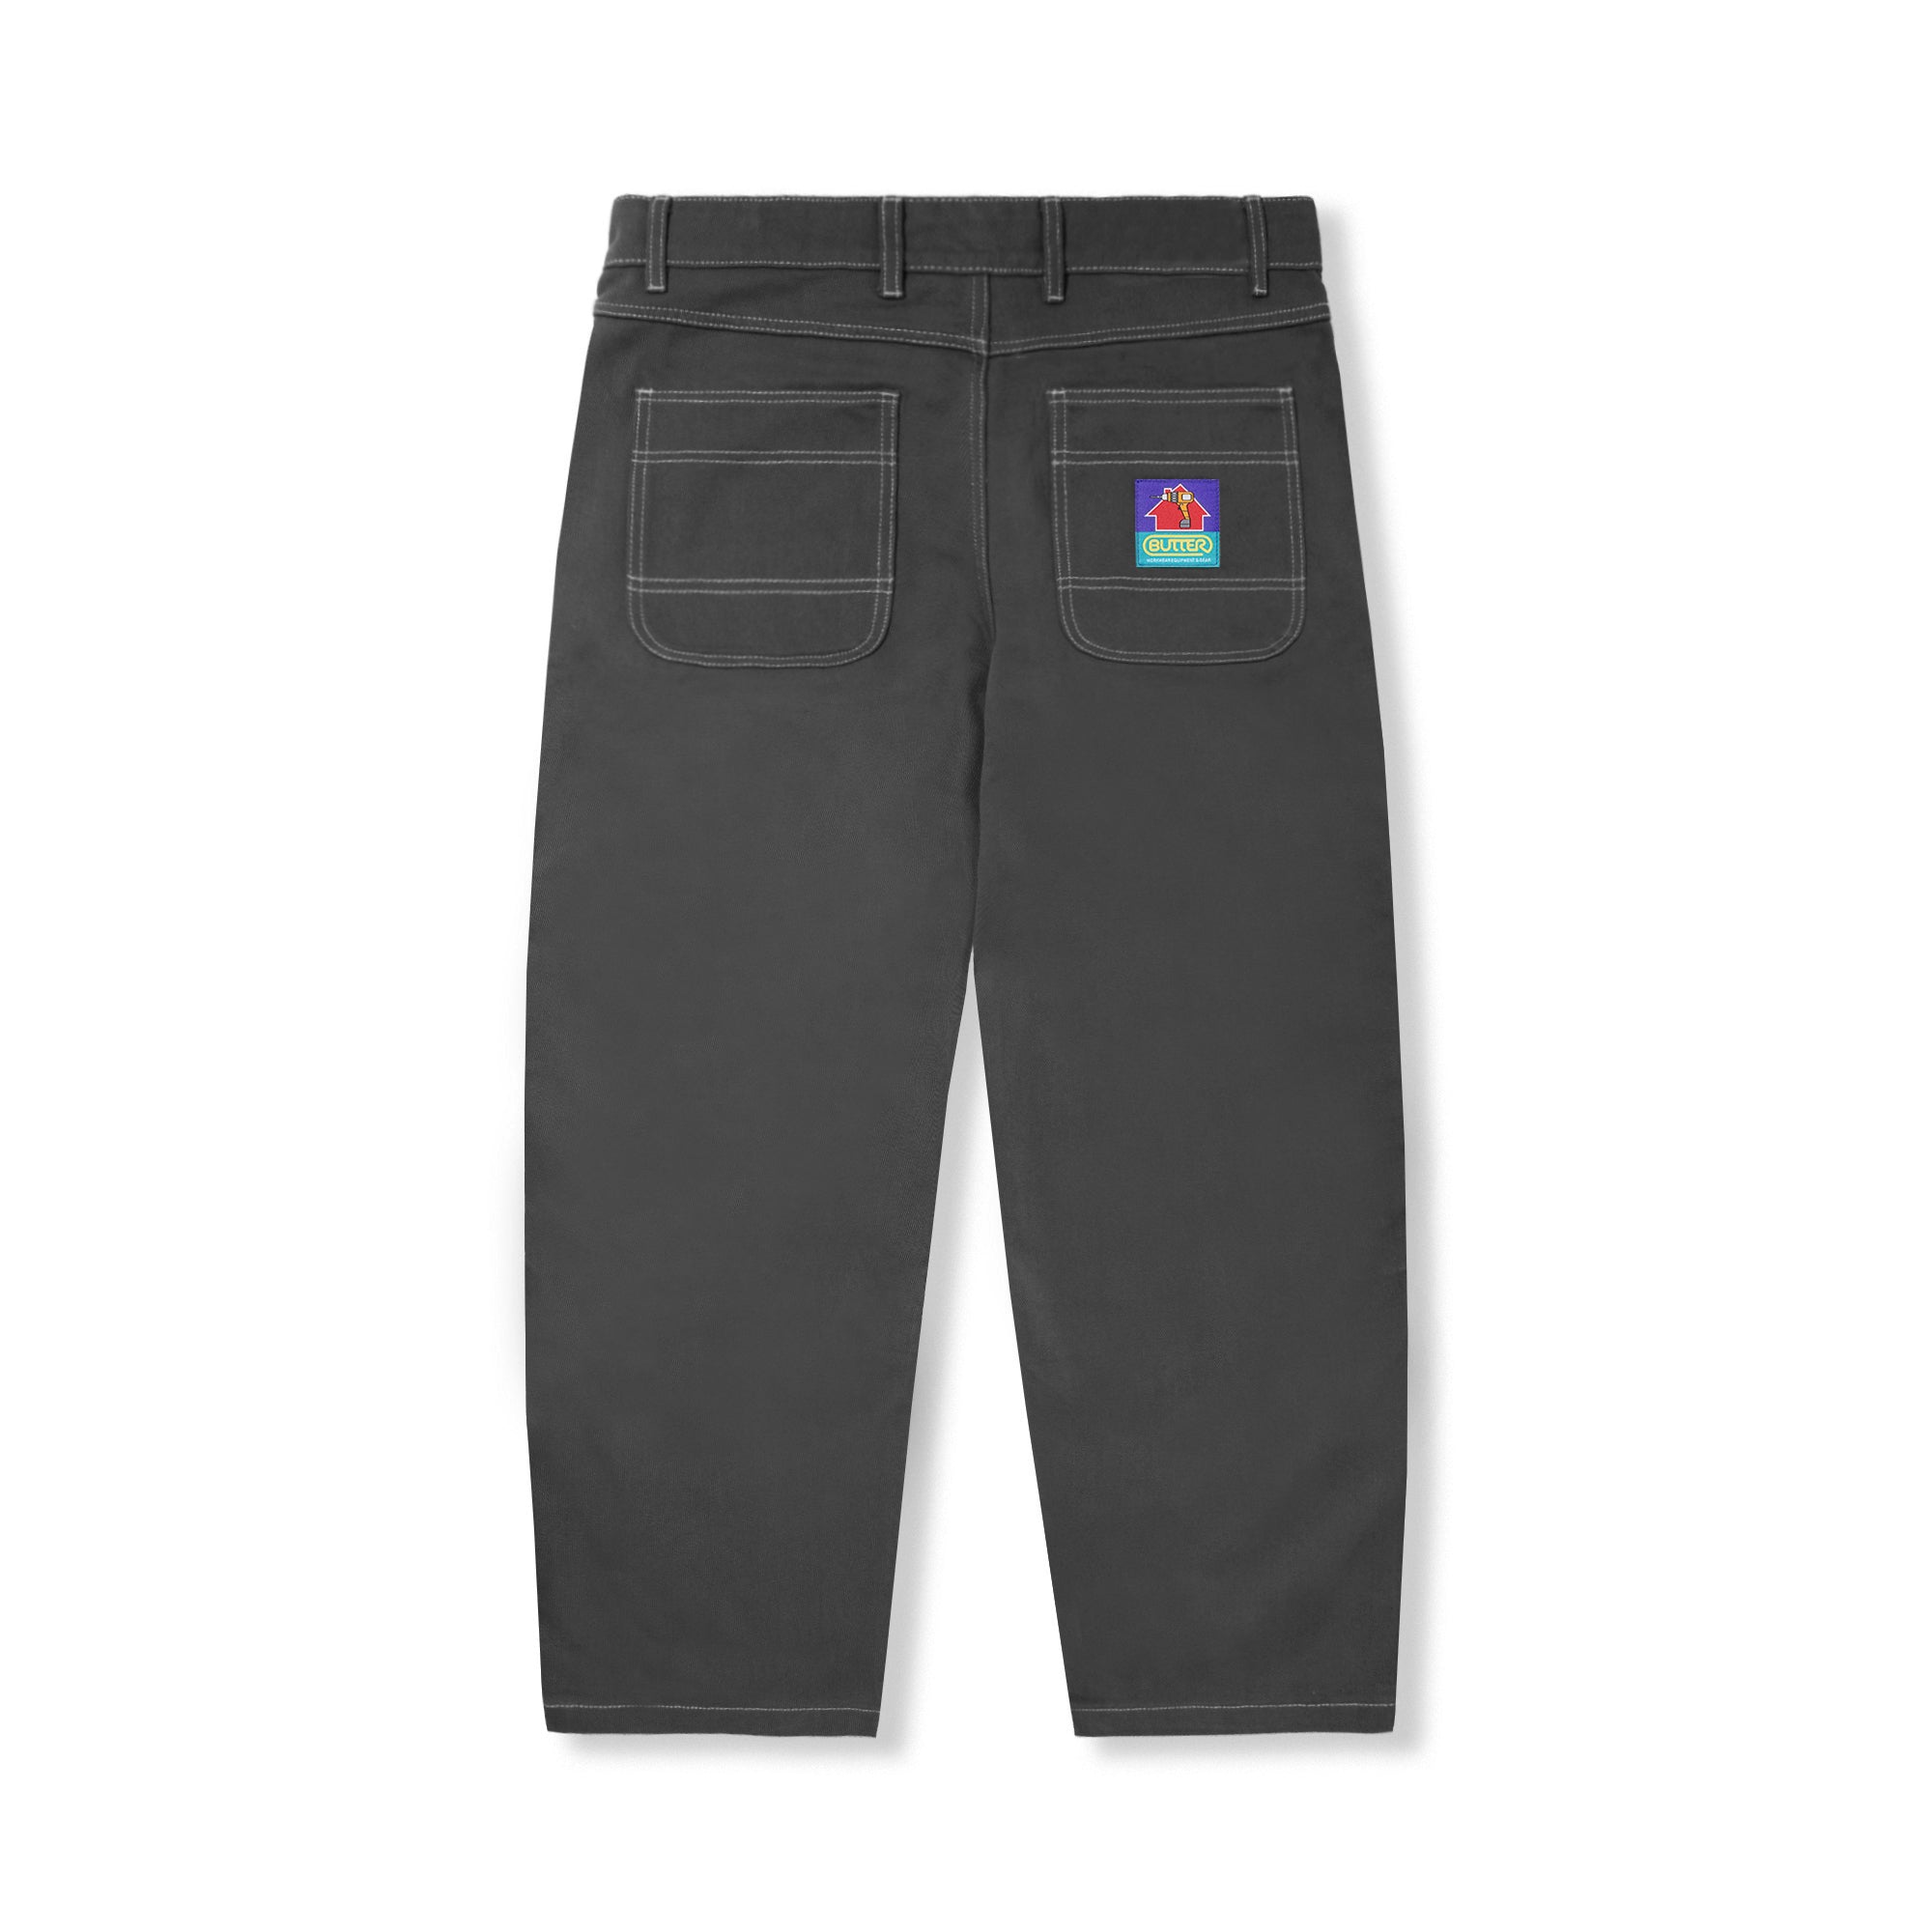 Butter Goods Work Double Knee Pants Charcoal